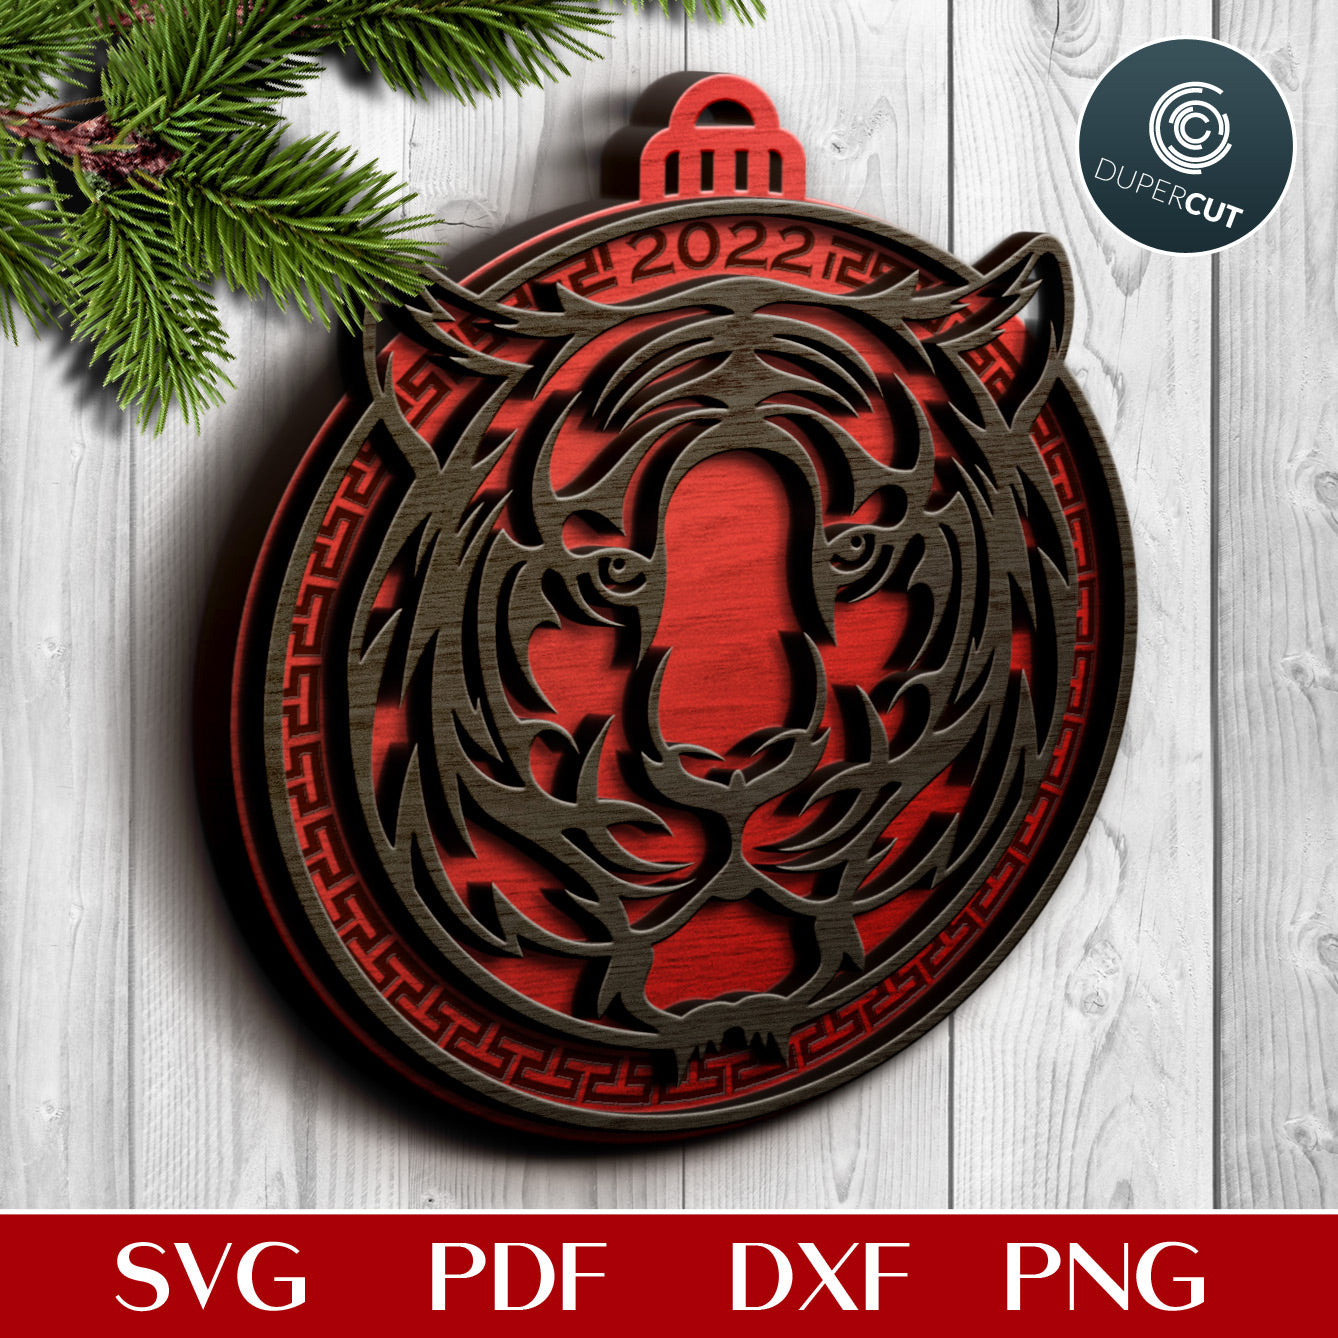 Tiger Chinese zodiac sign ornament - SVG PDF DXF vector cutting files for laser, Glowforge, Cricut, Silhouette Cameo